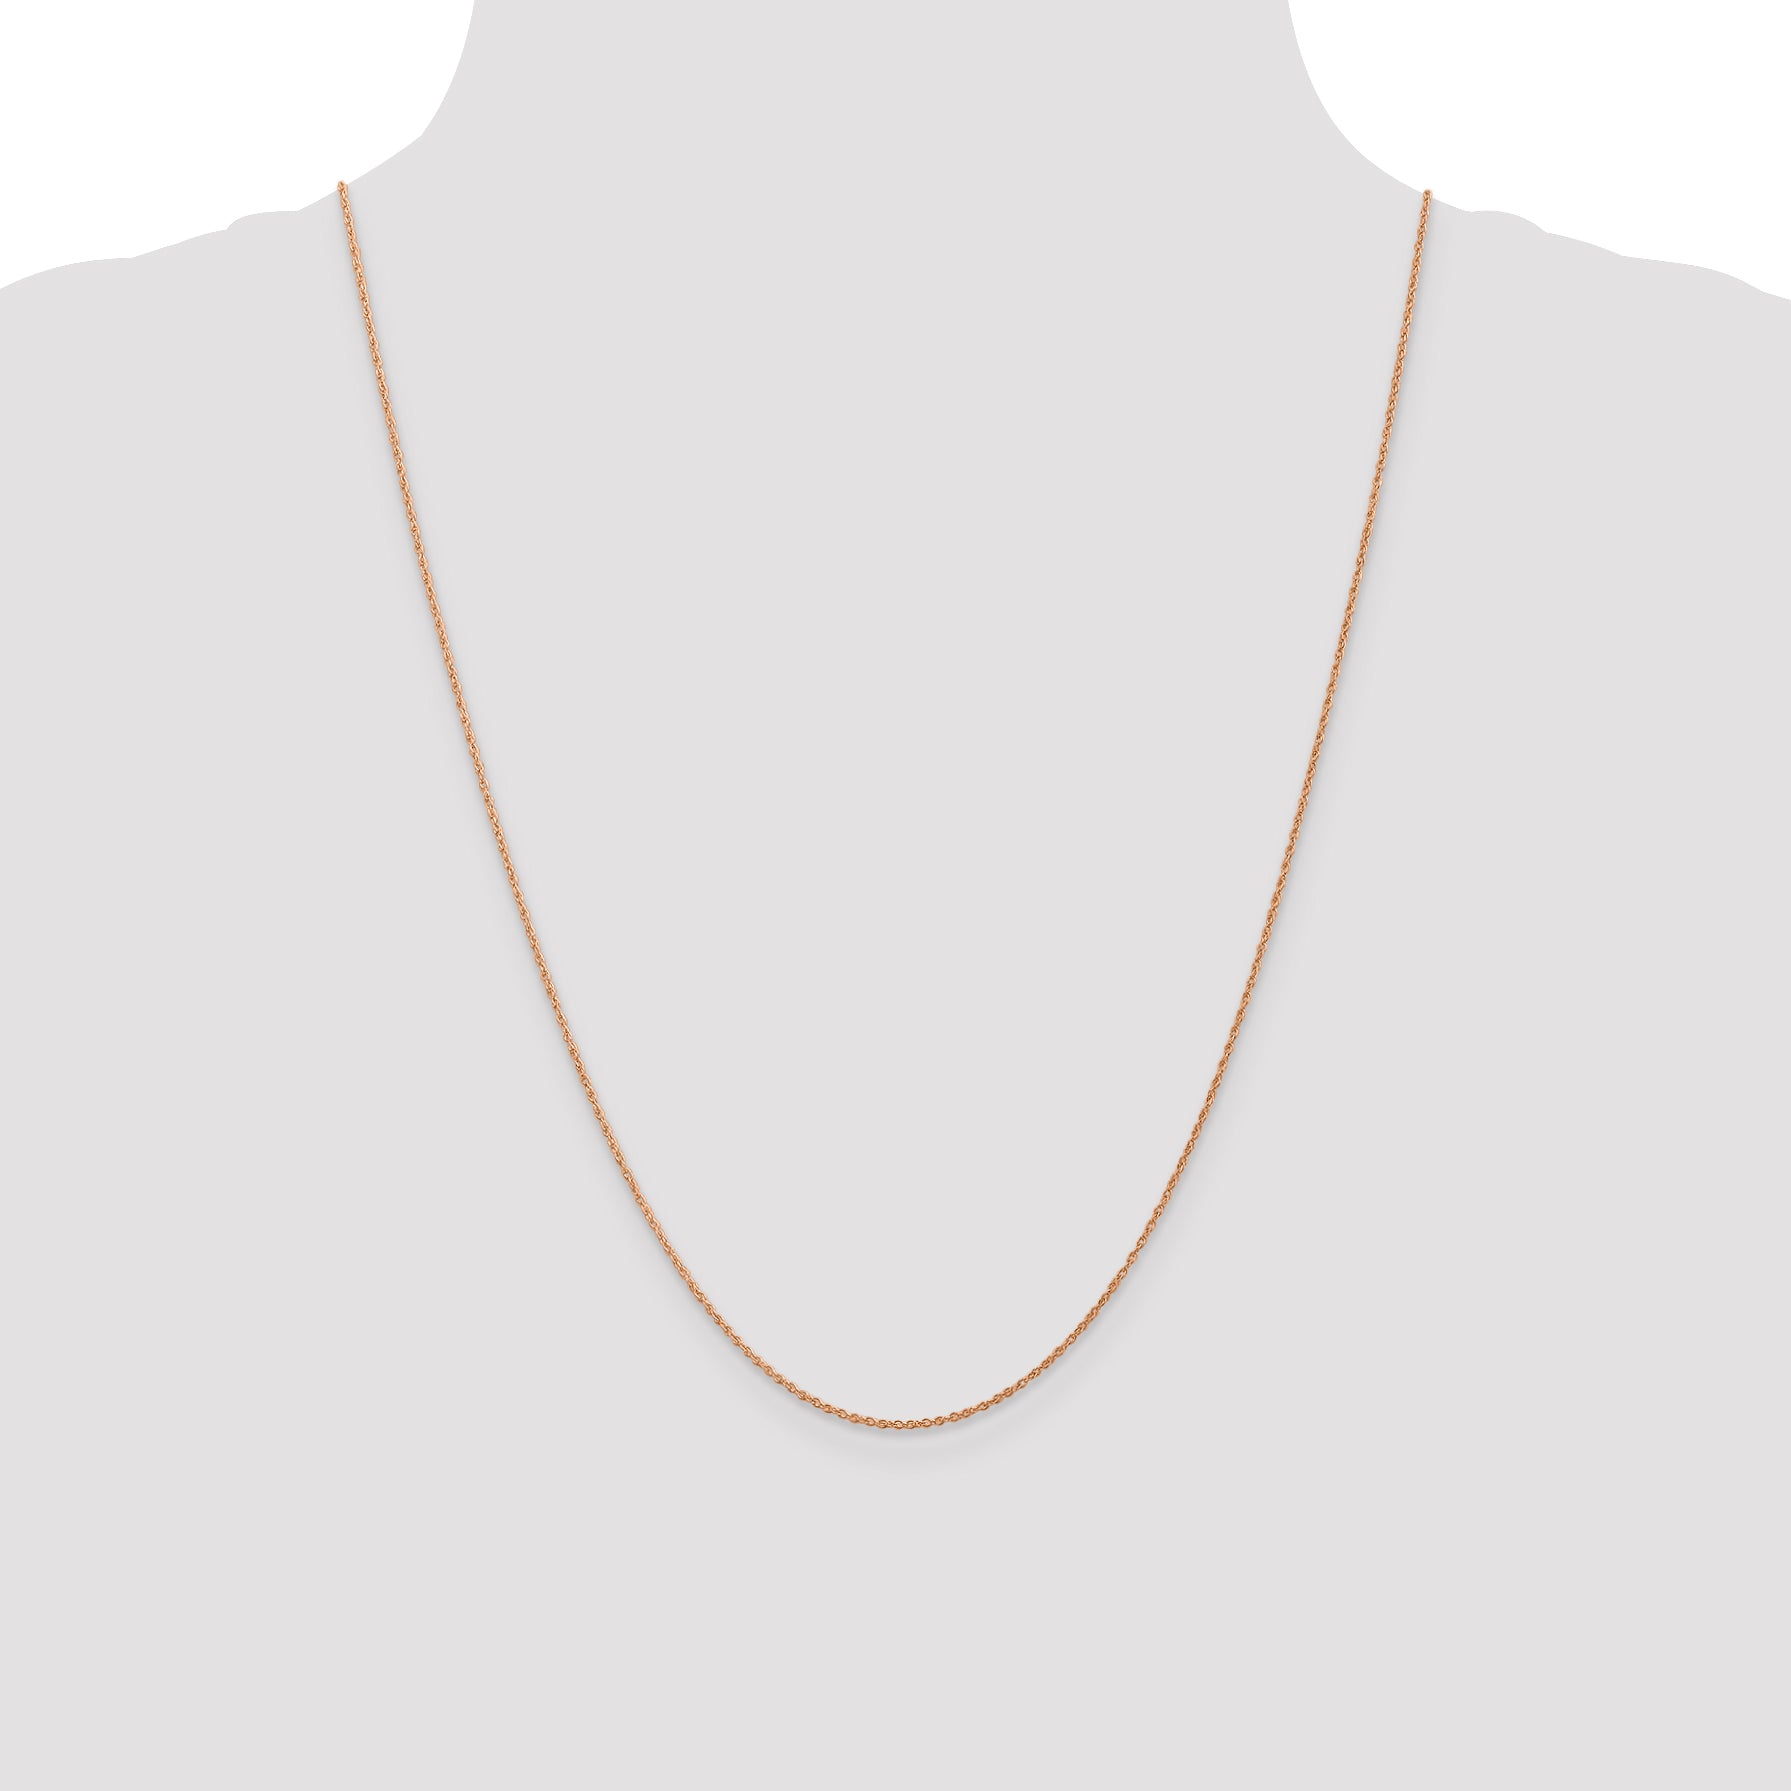 14K Rose Gold 16 inch .8mm Baby Rope with Spring Ring Clasp Chain